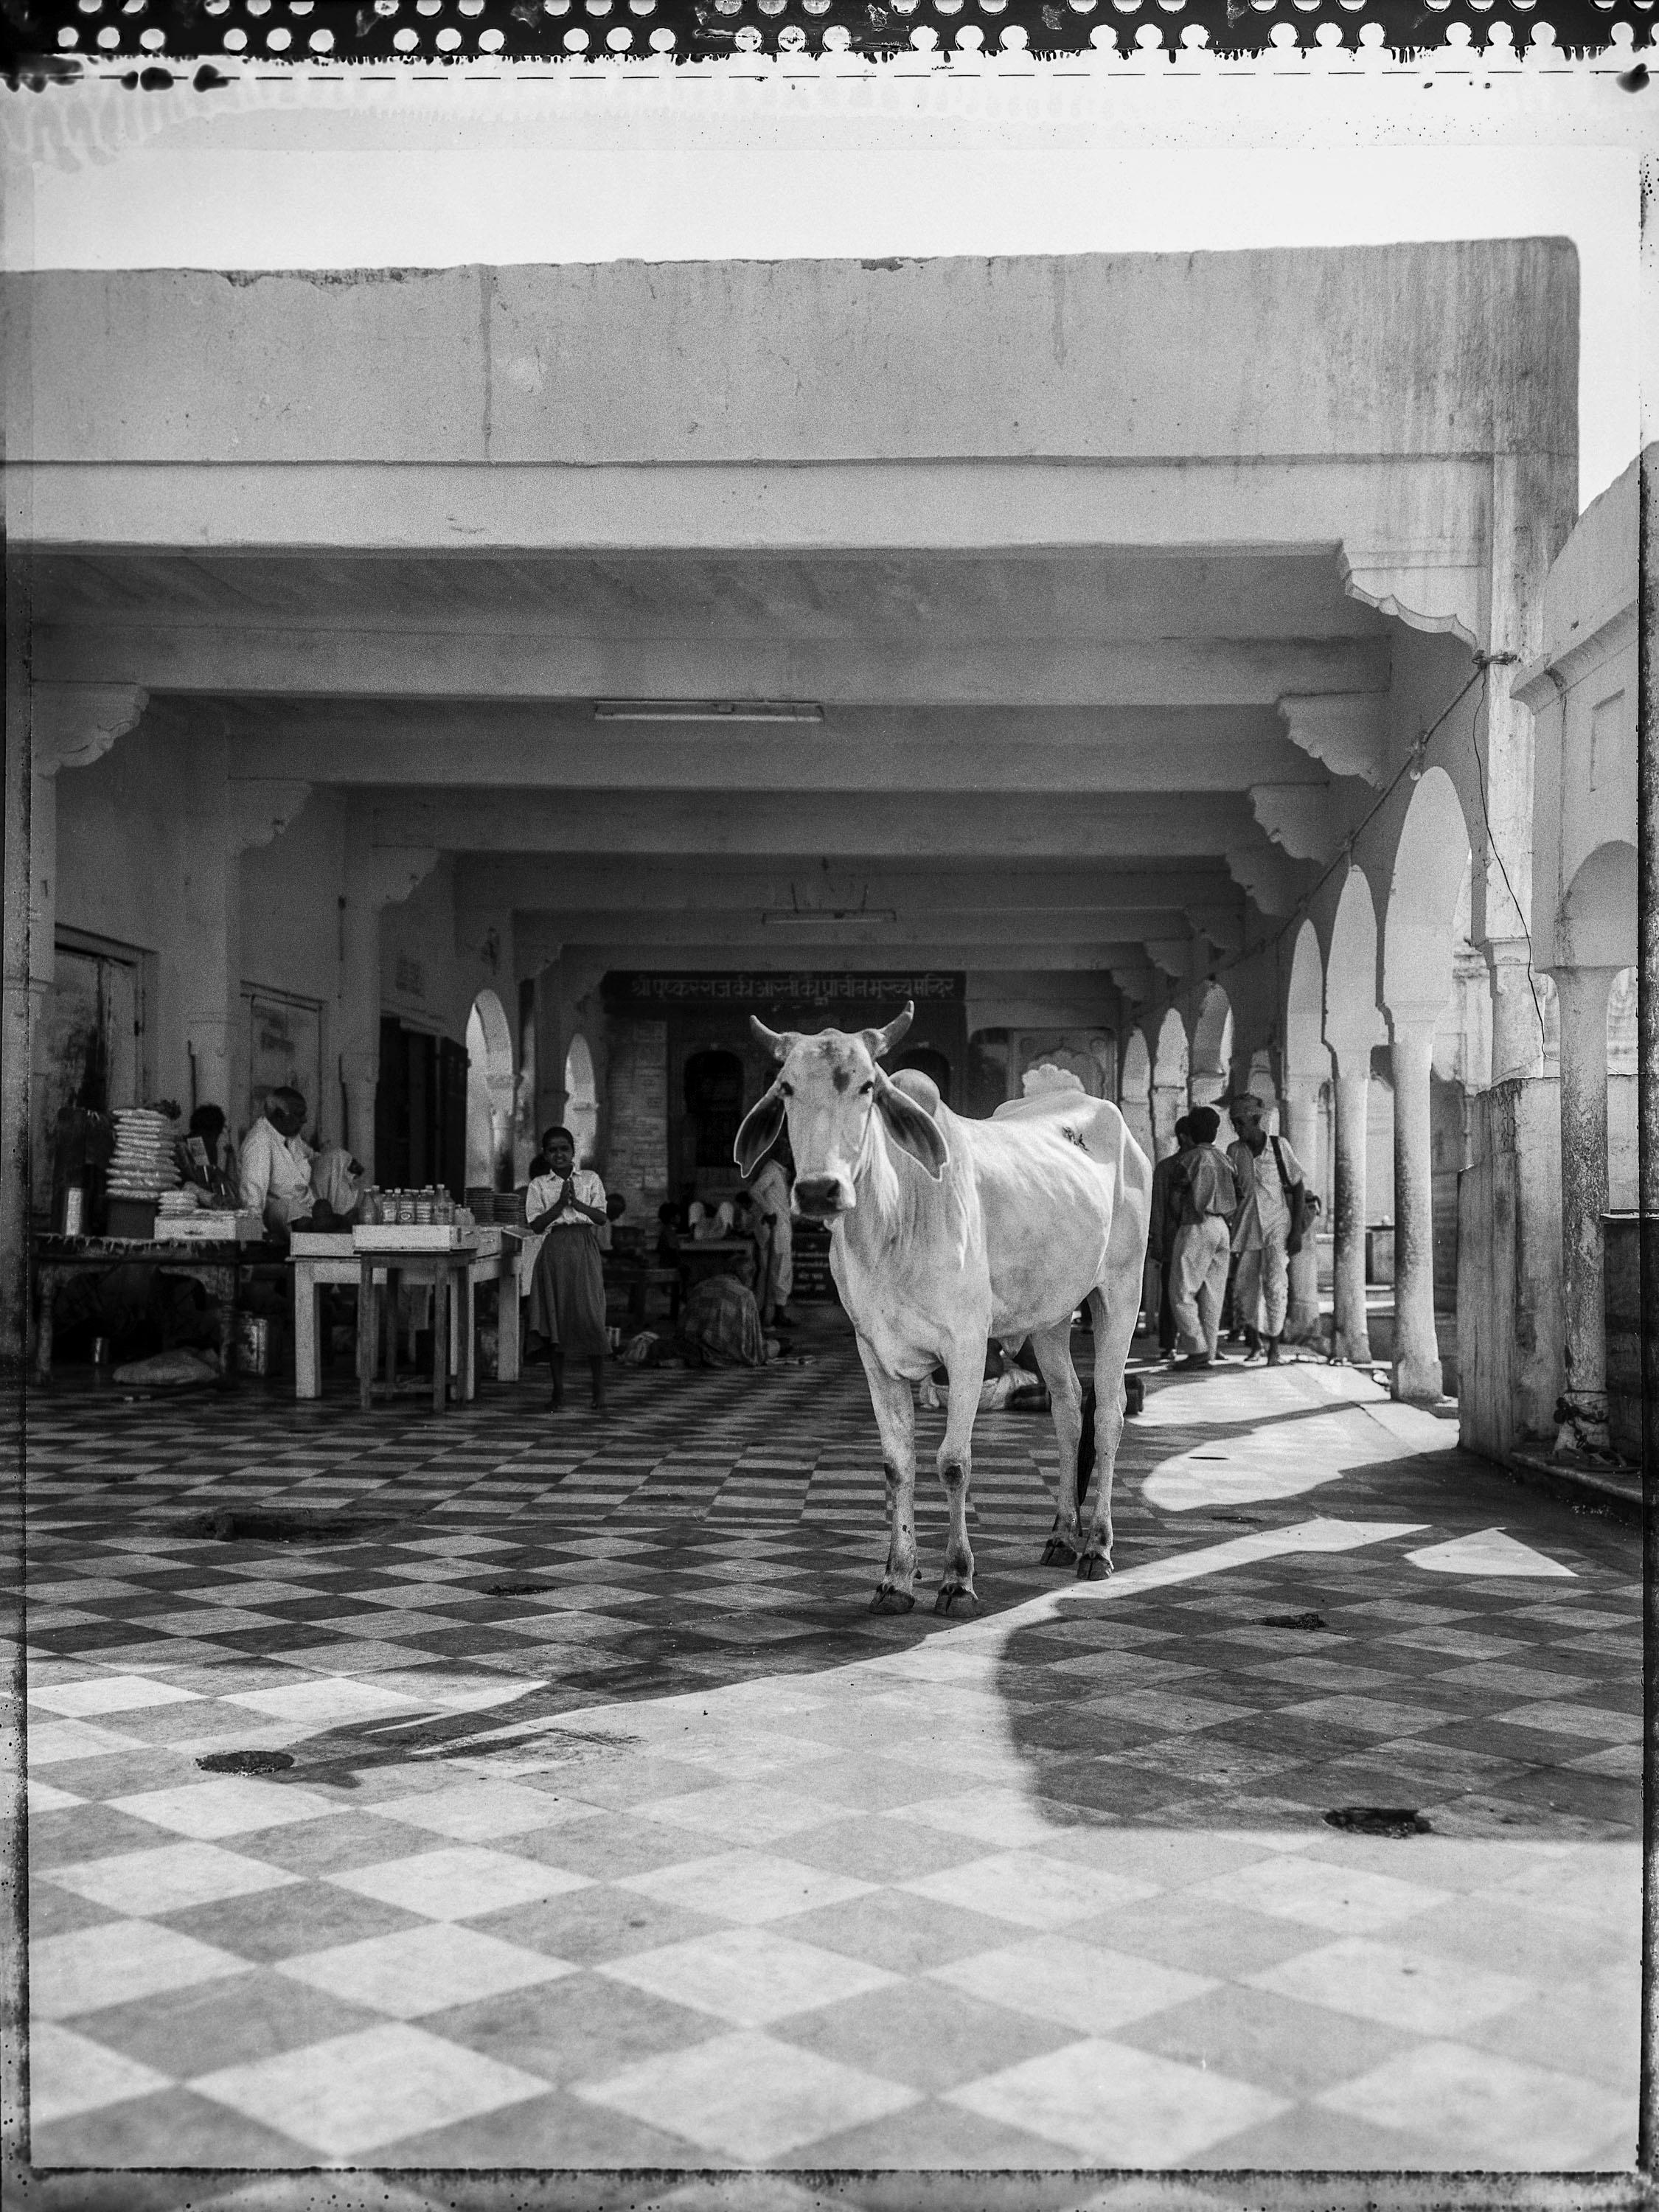 Carlo Bevilacqua Portrait Photograph - Holy cow in a Pushkar Market - Rajastan - India - ( from  Indian Stills series )